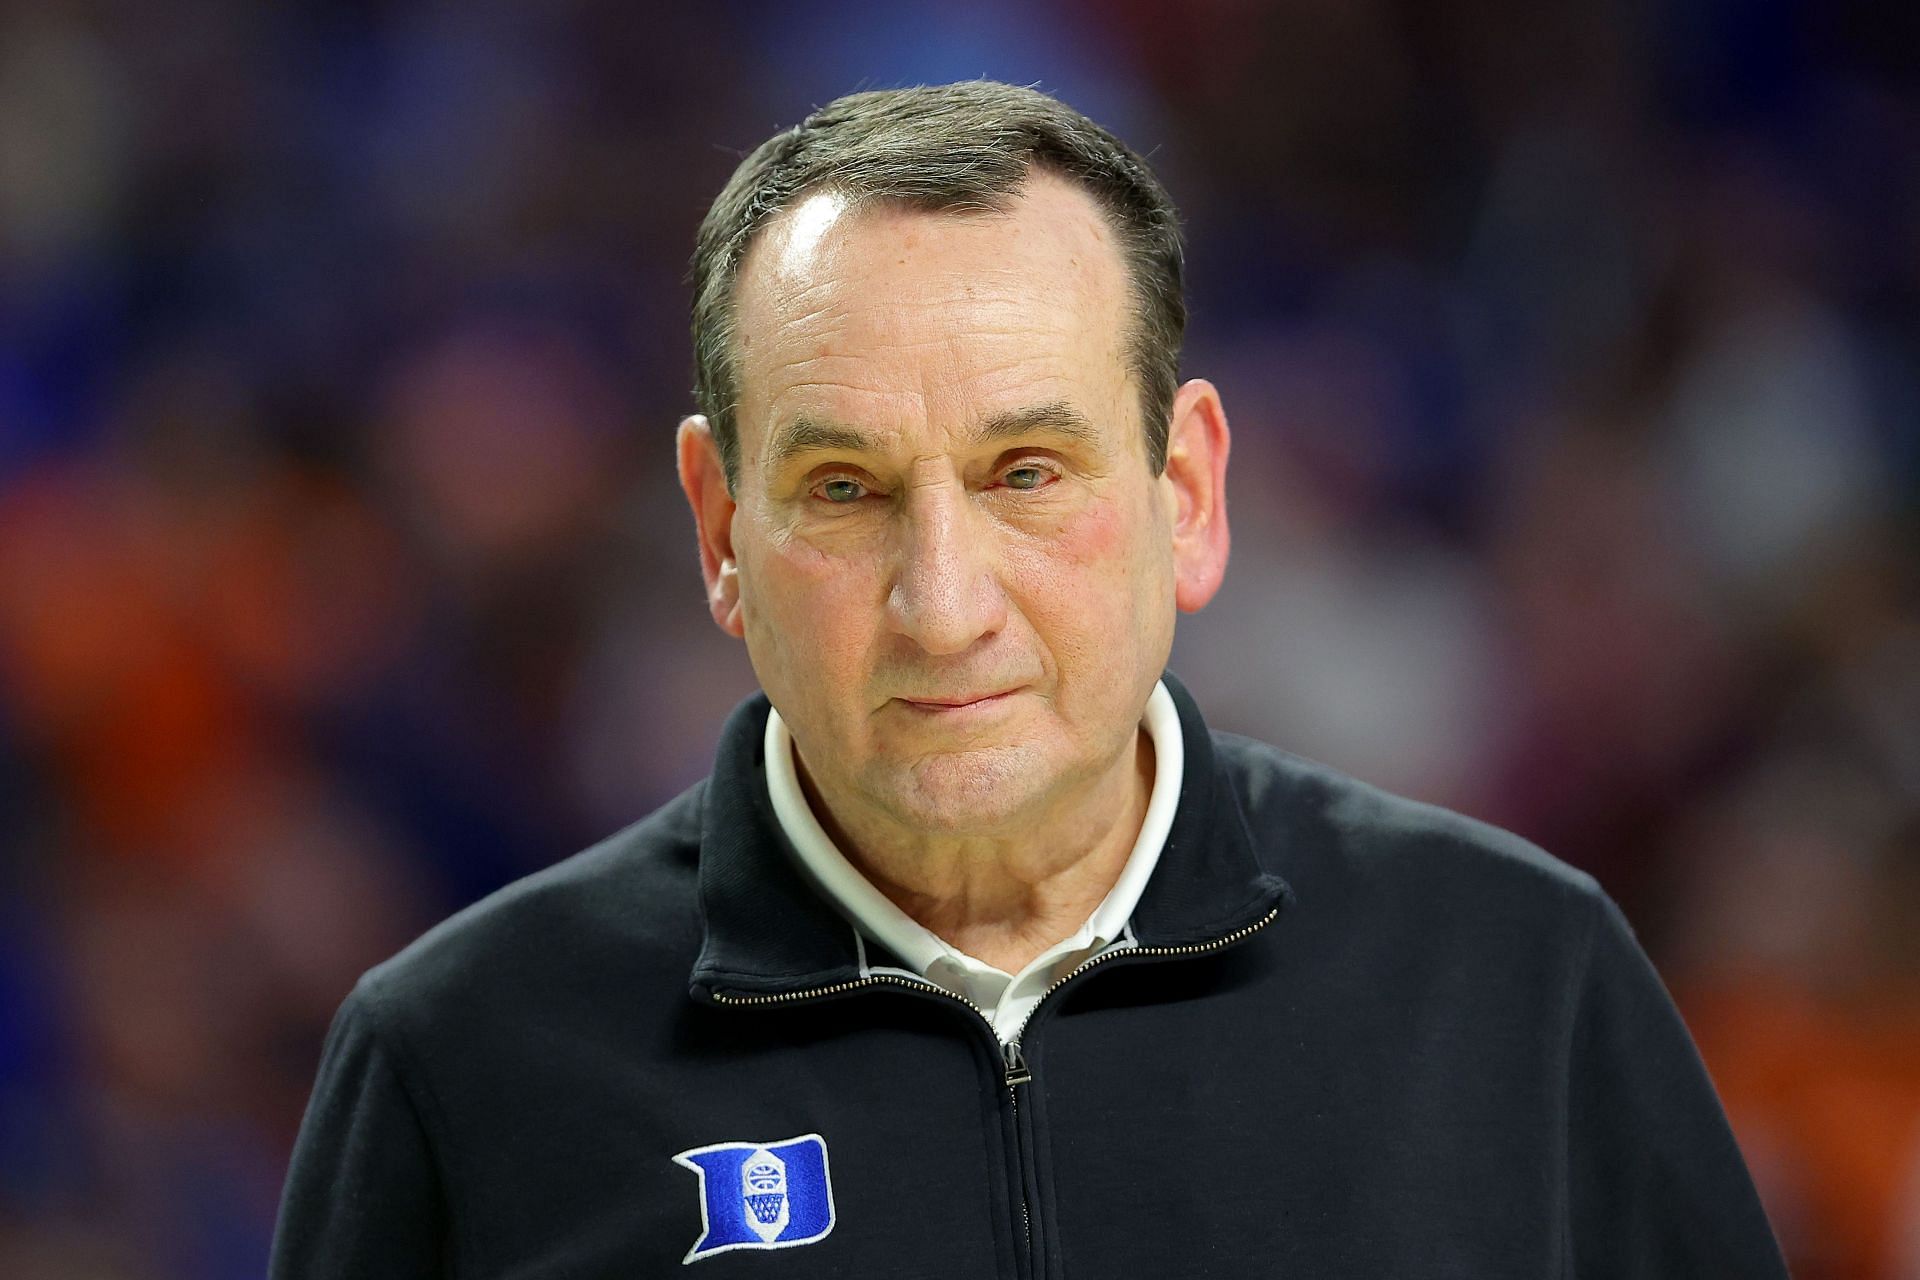 Coach K and Duke&#039;s win against Michigan State has them ready for a championship push.